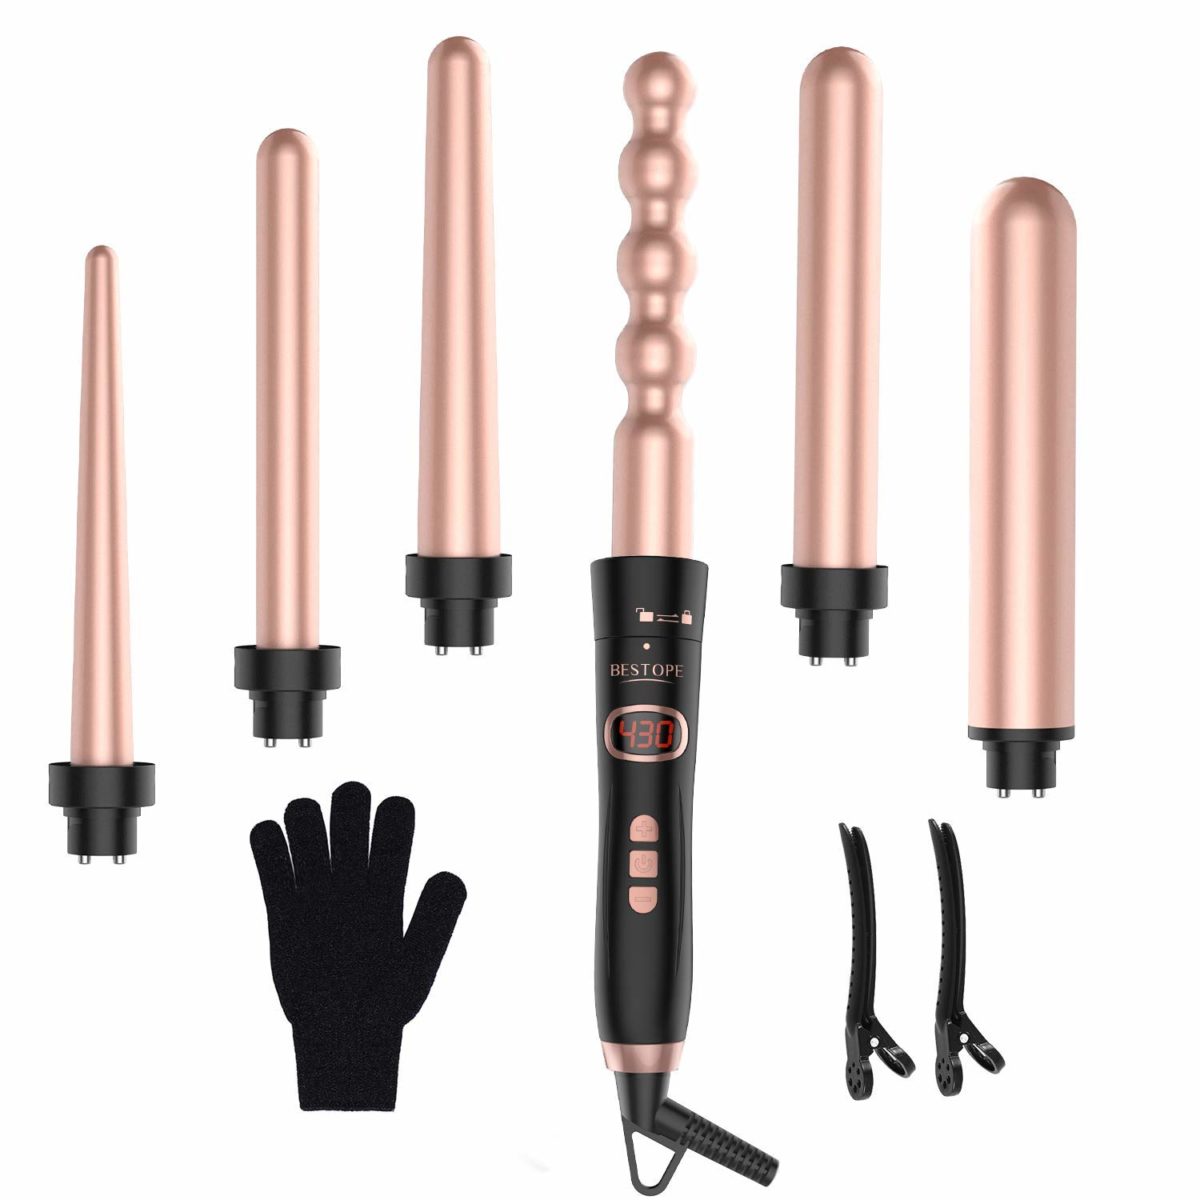 7 Awesome Curling Irons That Amazon Customers Are Loving and You Will Too